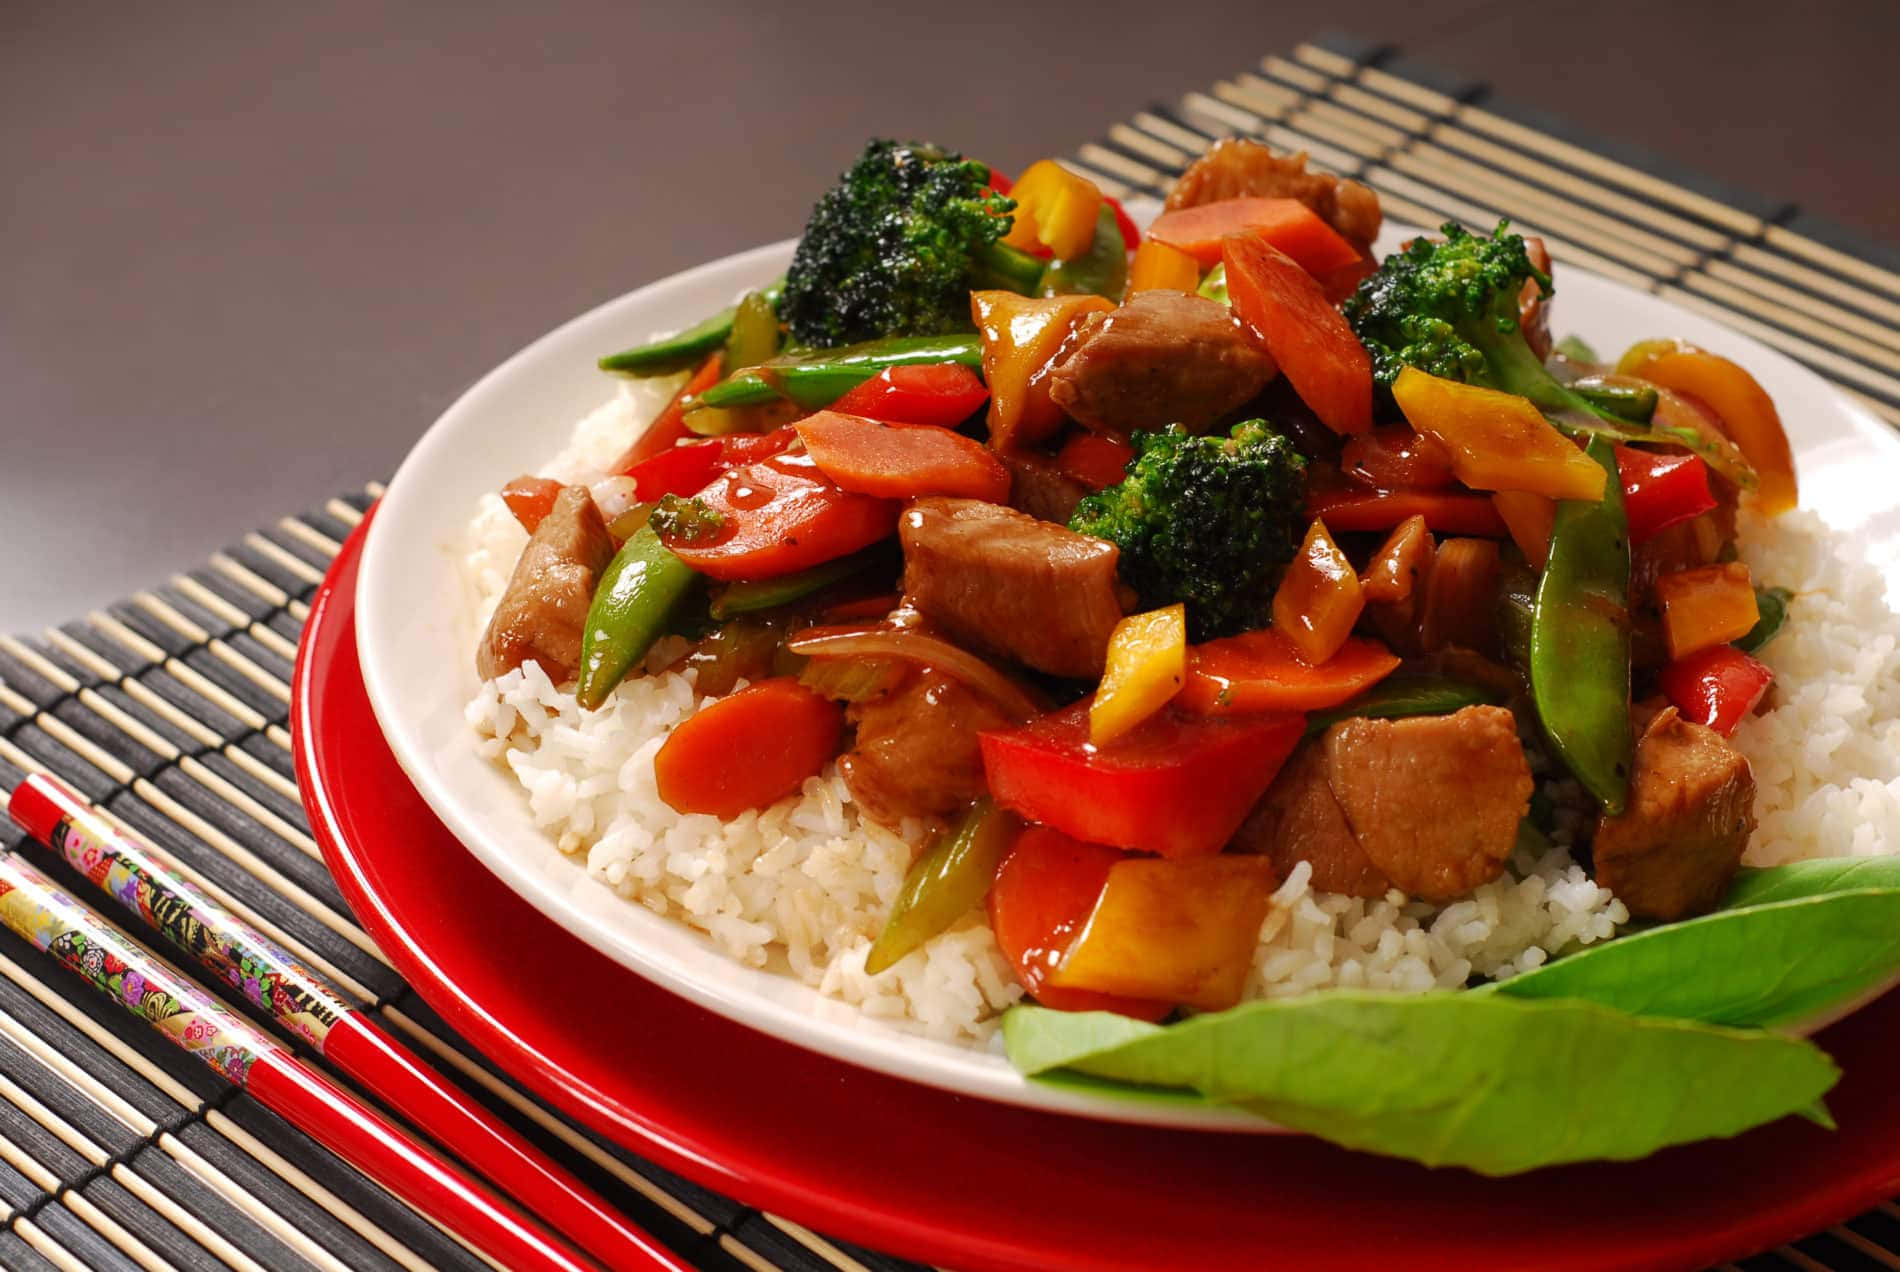 Zesty Chinese Food Wallpaper